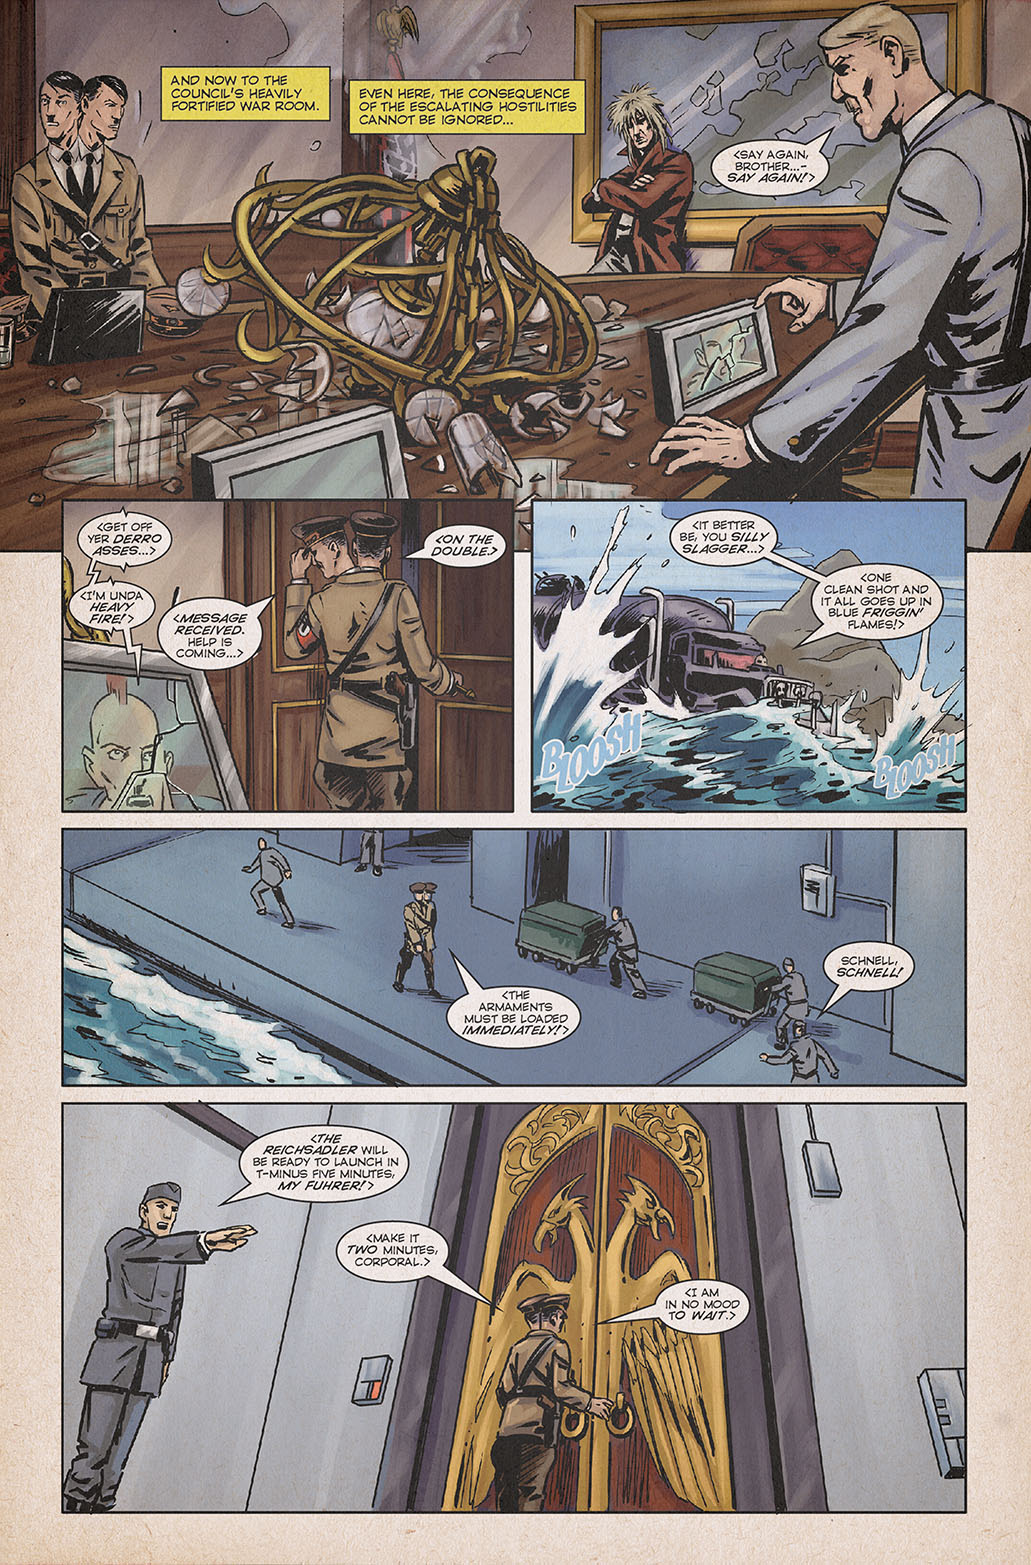 Our Fearful Trip is Done – Page 14